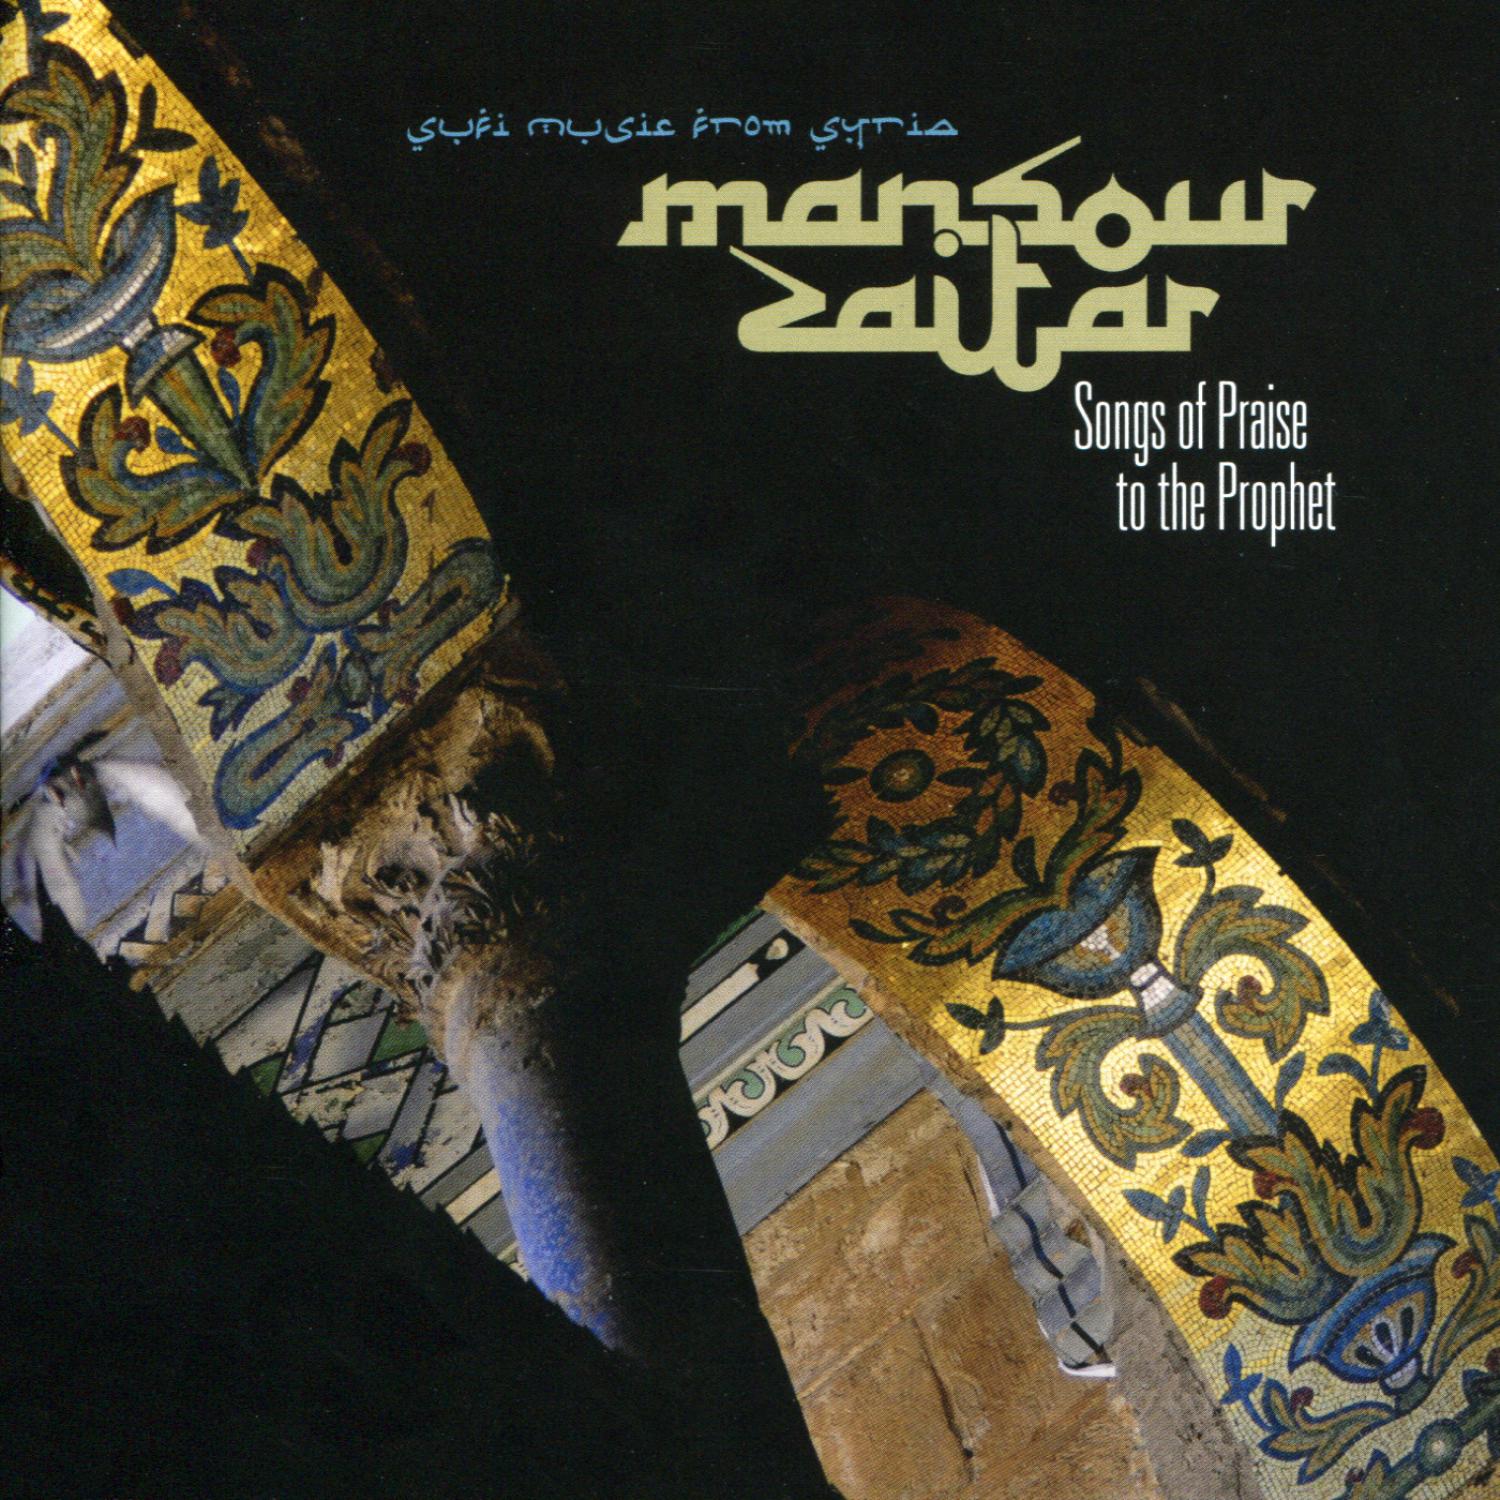 Songs of Praise to the Prophet (Sufi Music from Syria)